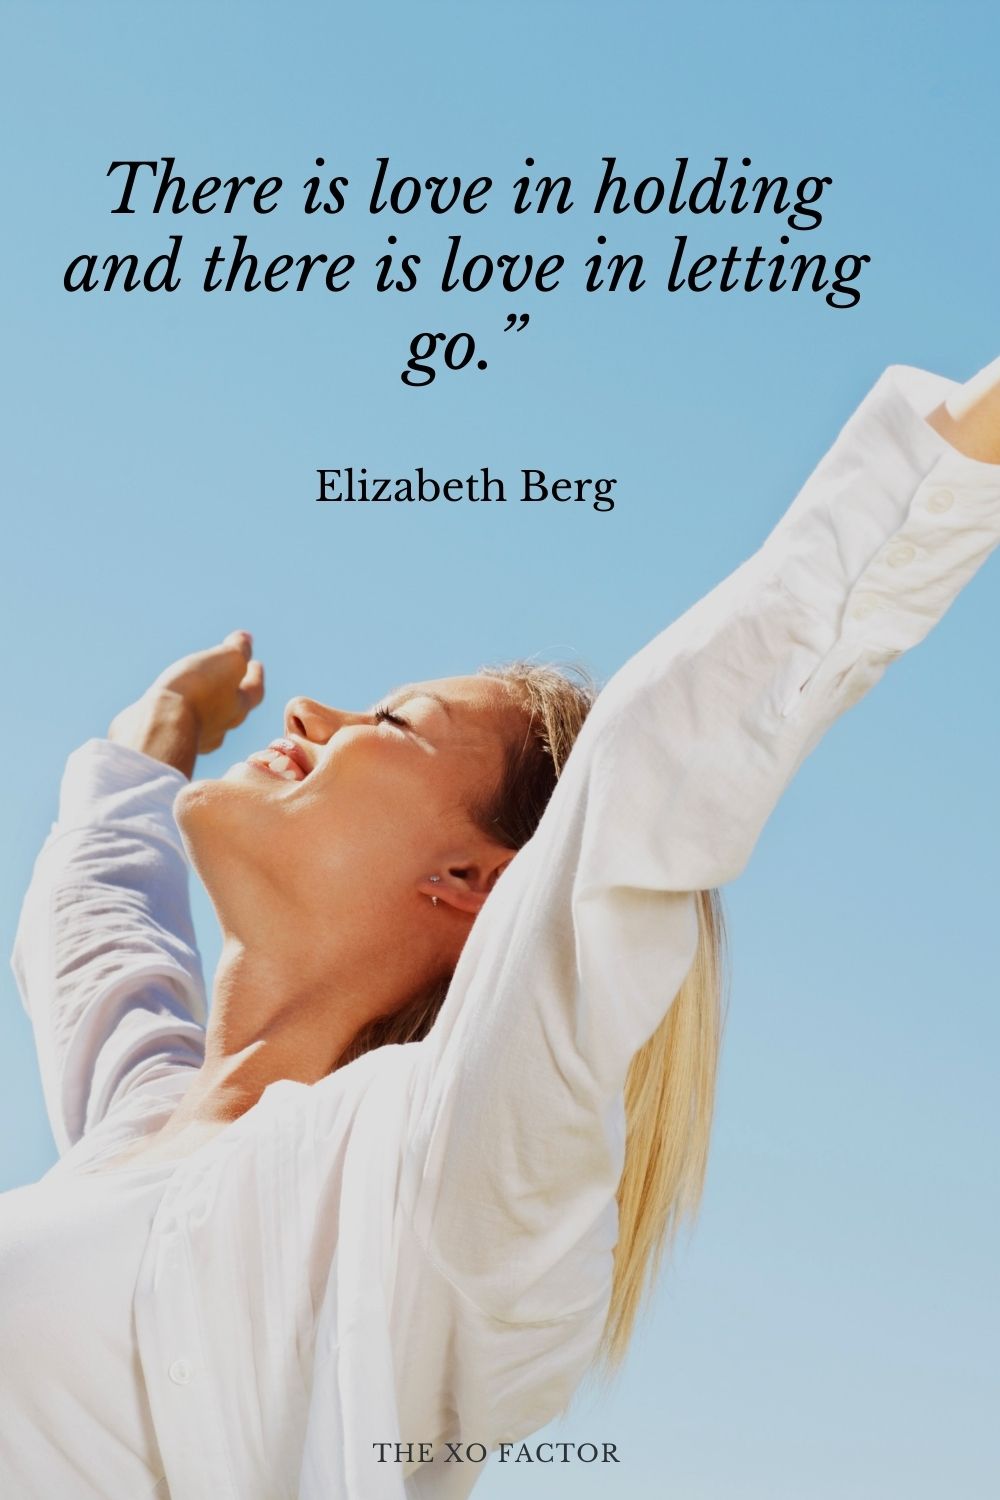 There is love in holding and there is love in letting go.” Elizabeth Berg